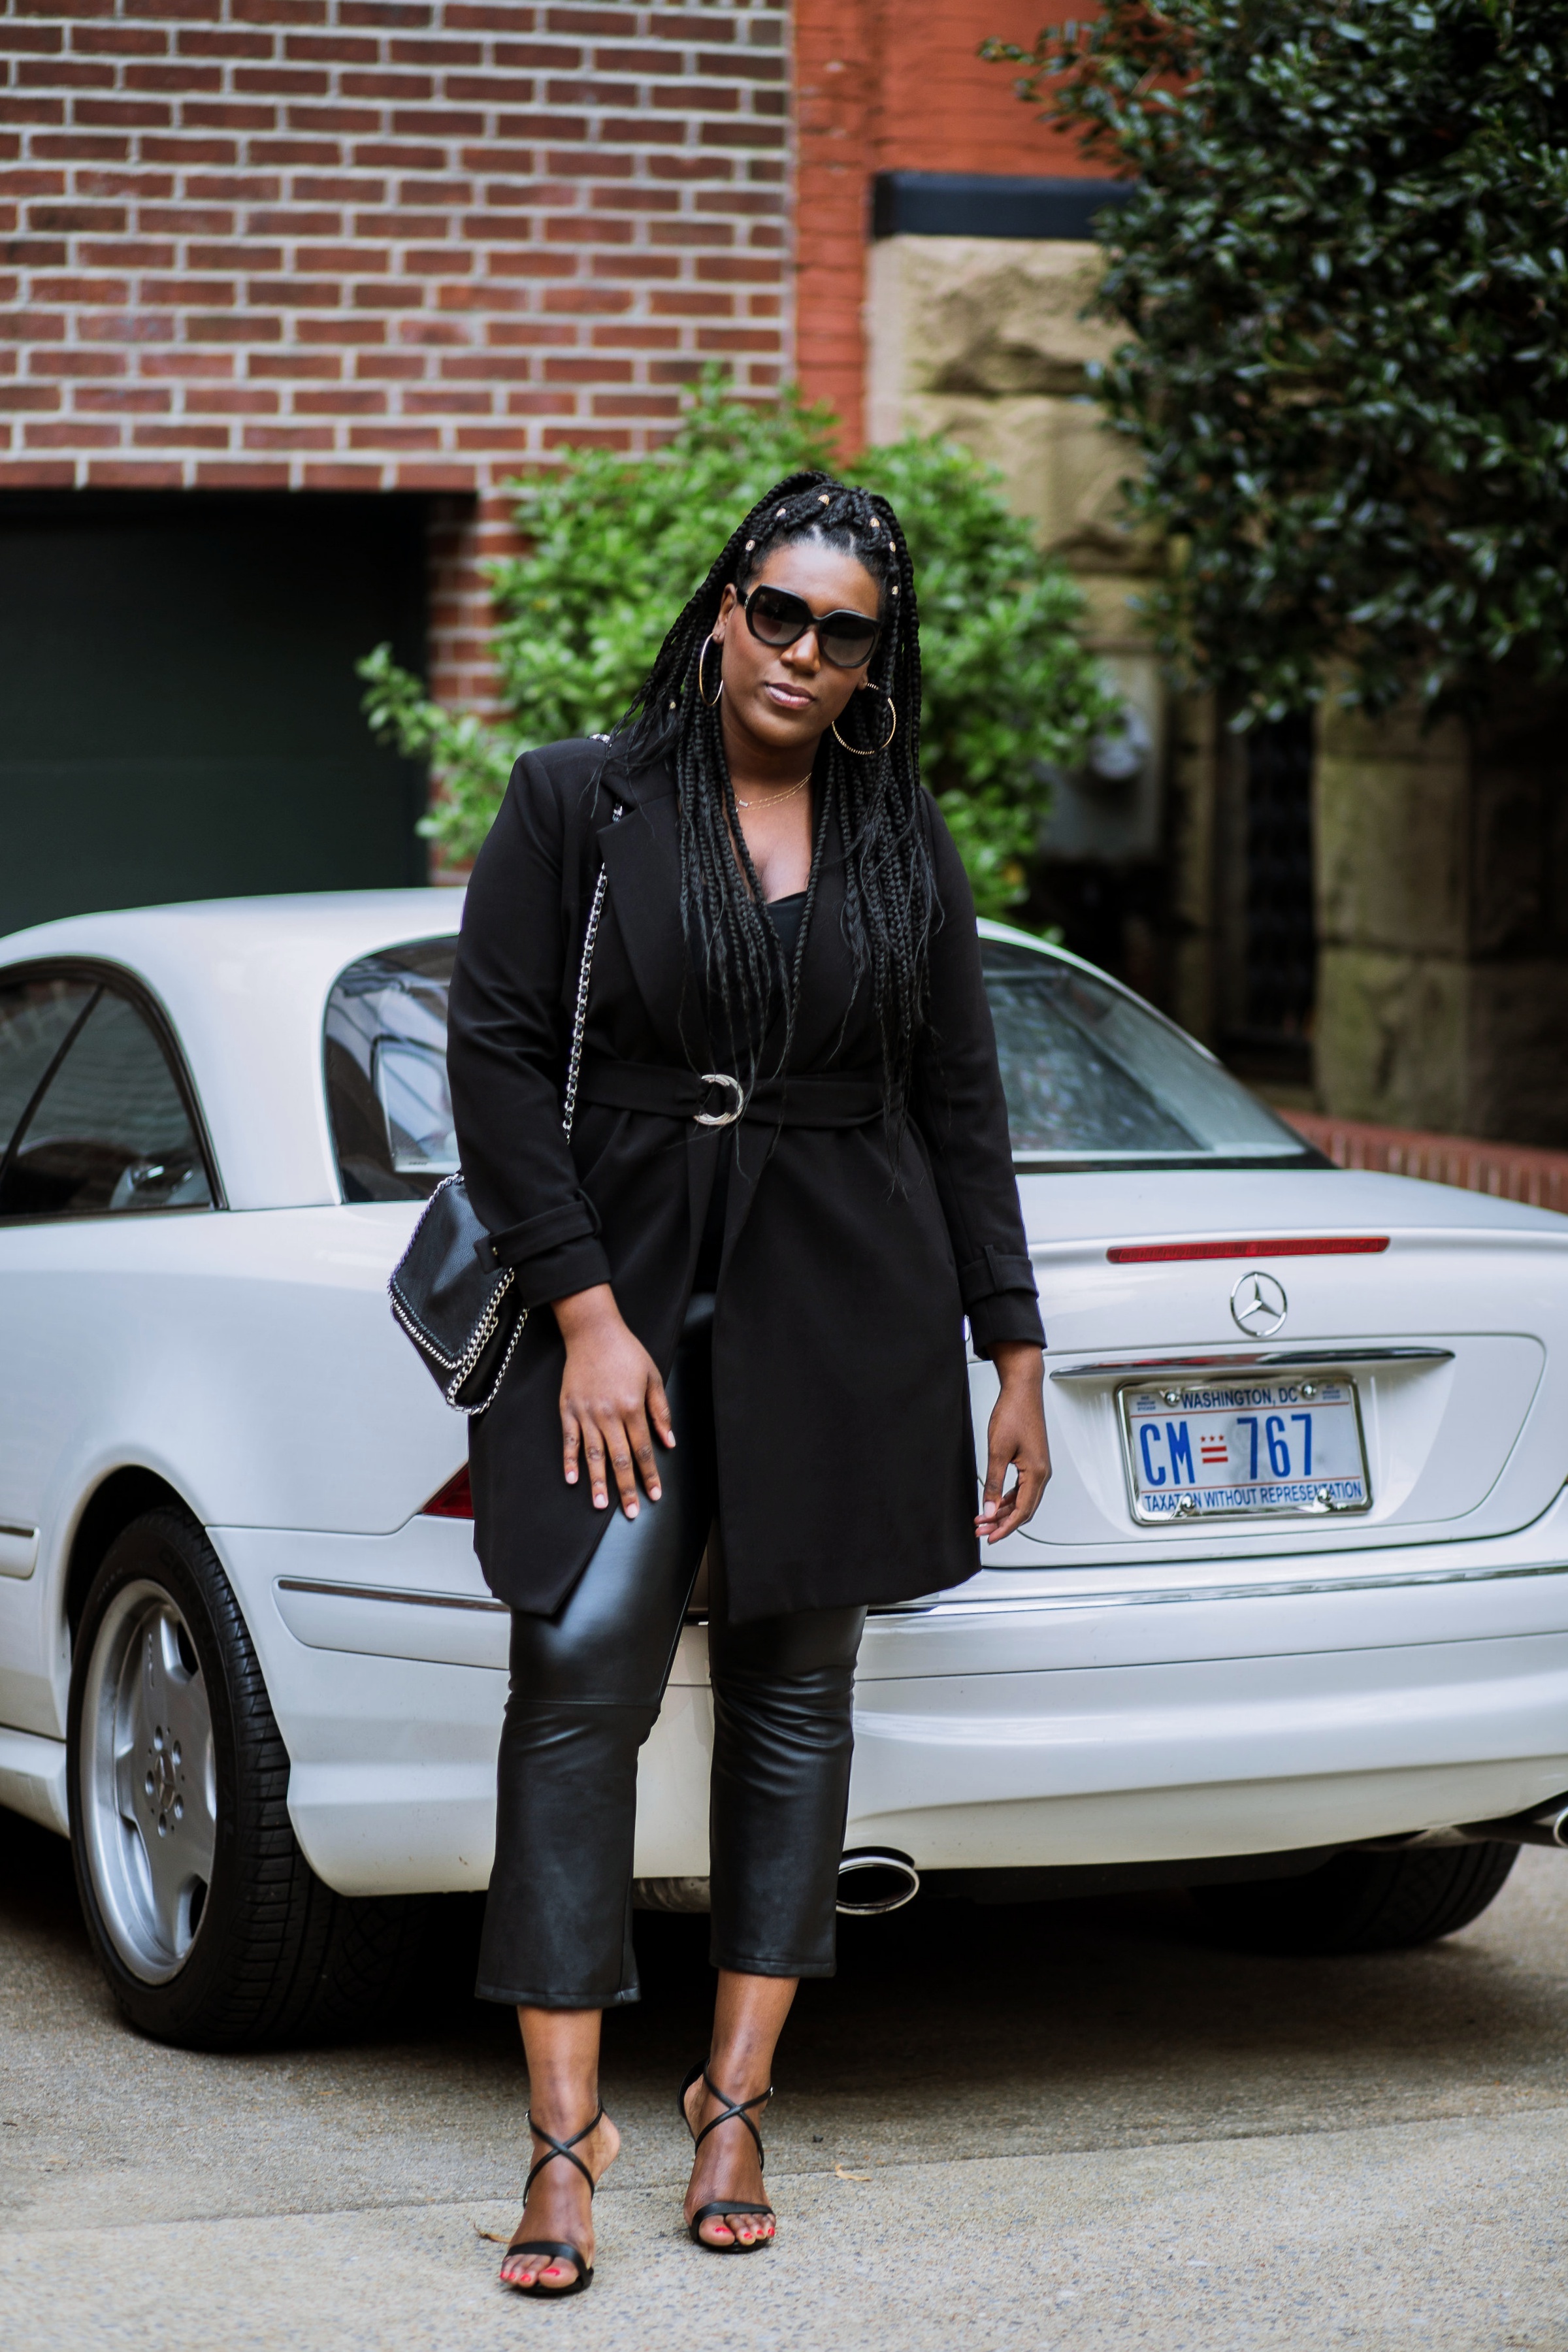 How To Look Effortlessly Chic — Plus Size Fashion Influencer & Consultant